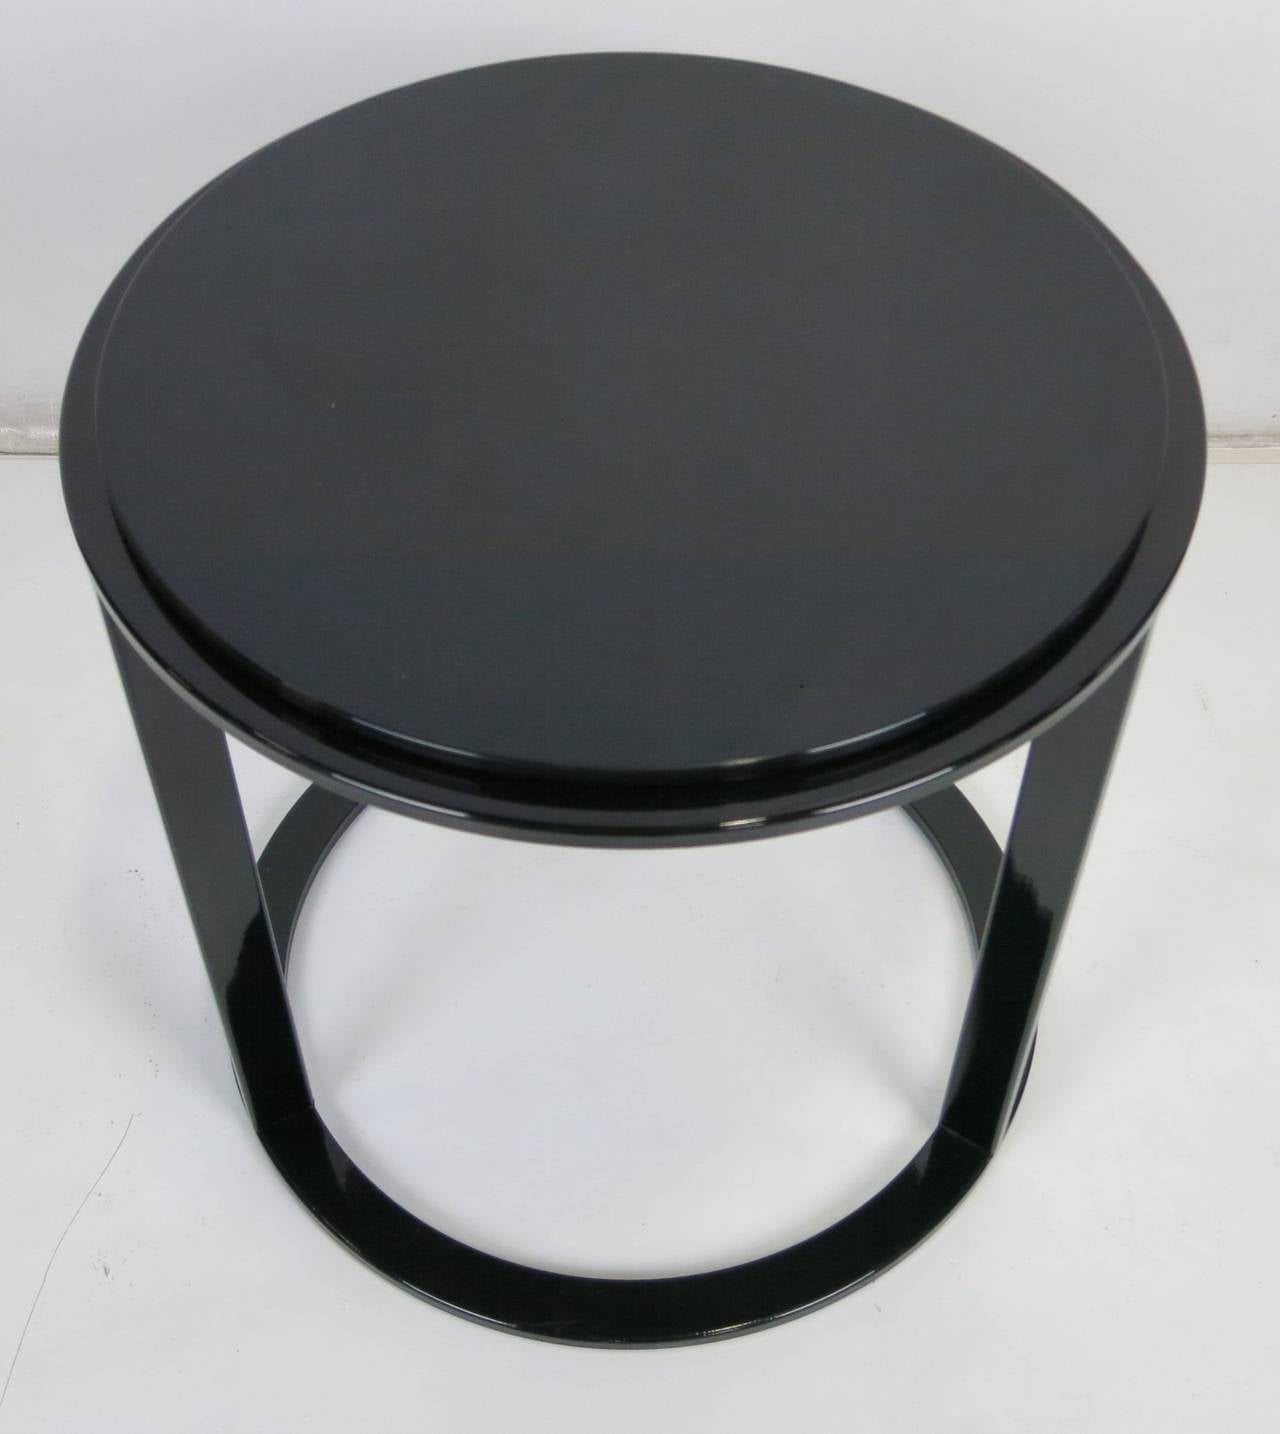 Pair of black lacquered Minimalist modern side tables with black glass tops by Minotti.